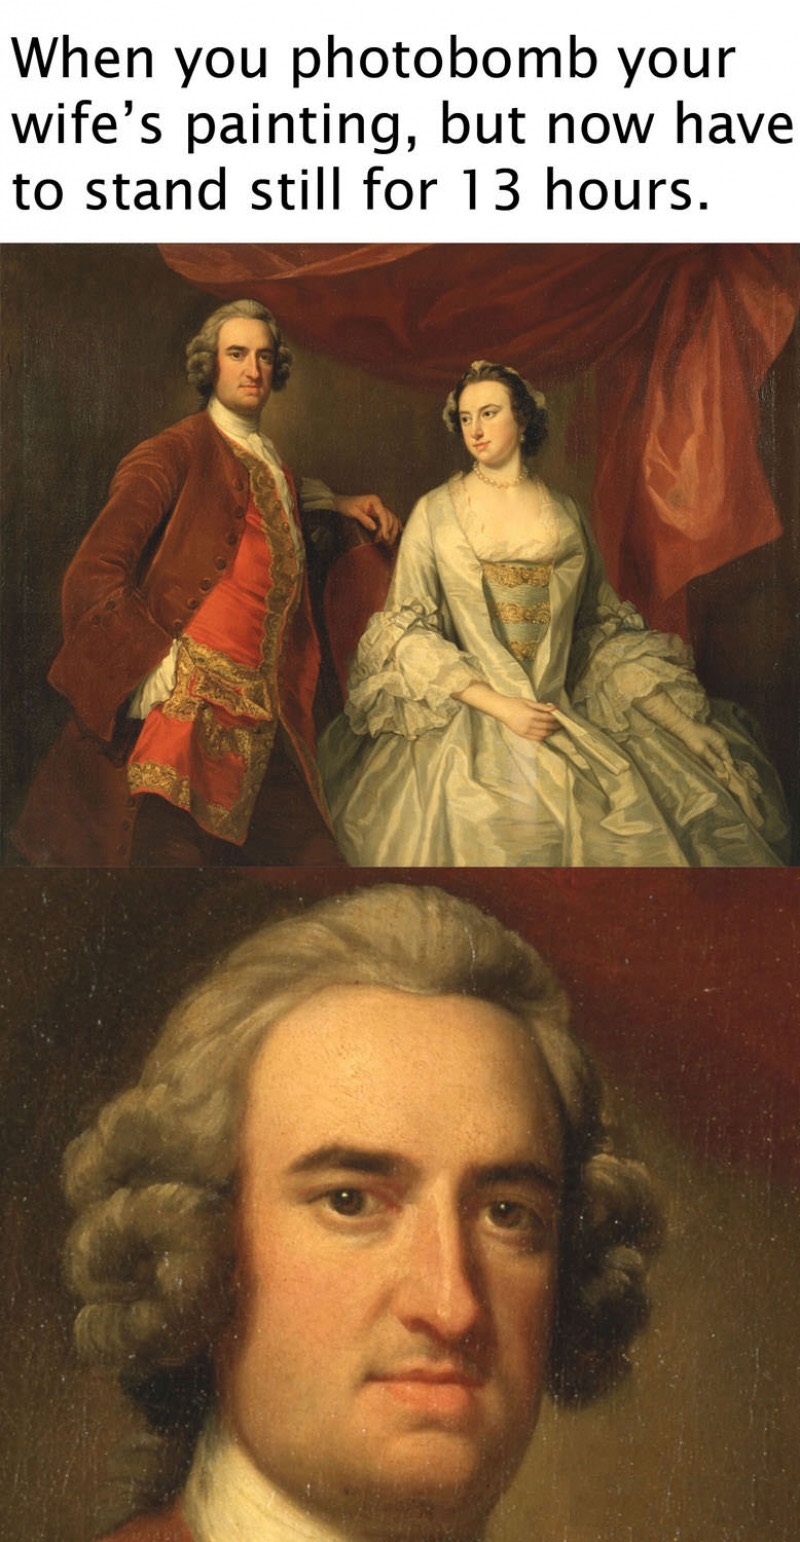 classical art memes - When you photobomb your wife's painting, but now have to stand still for 13 hours.